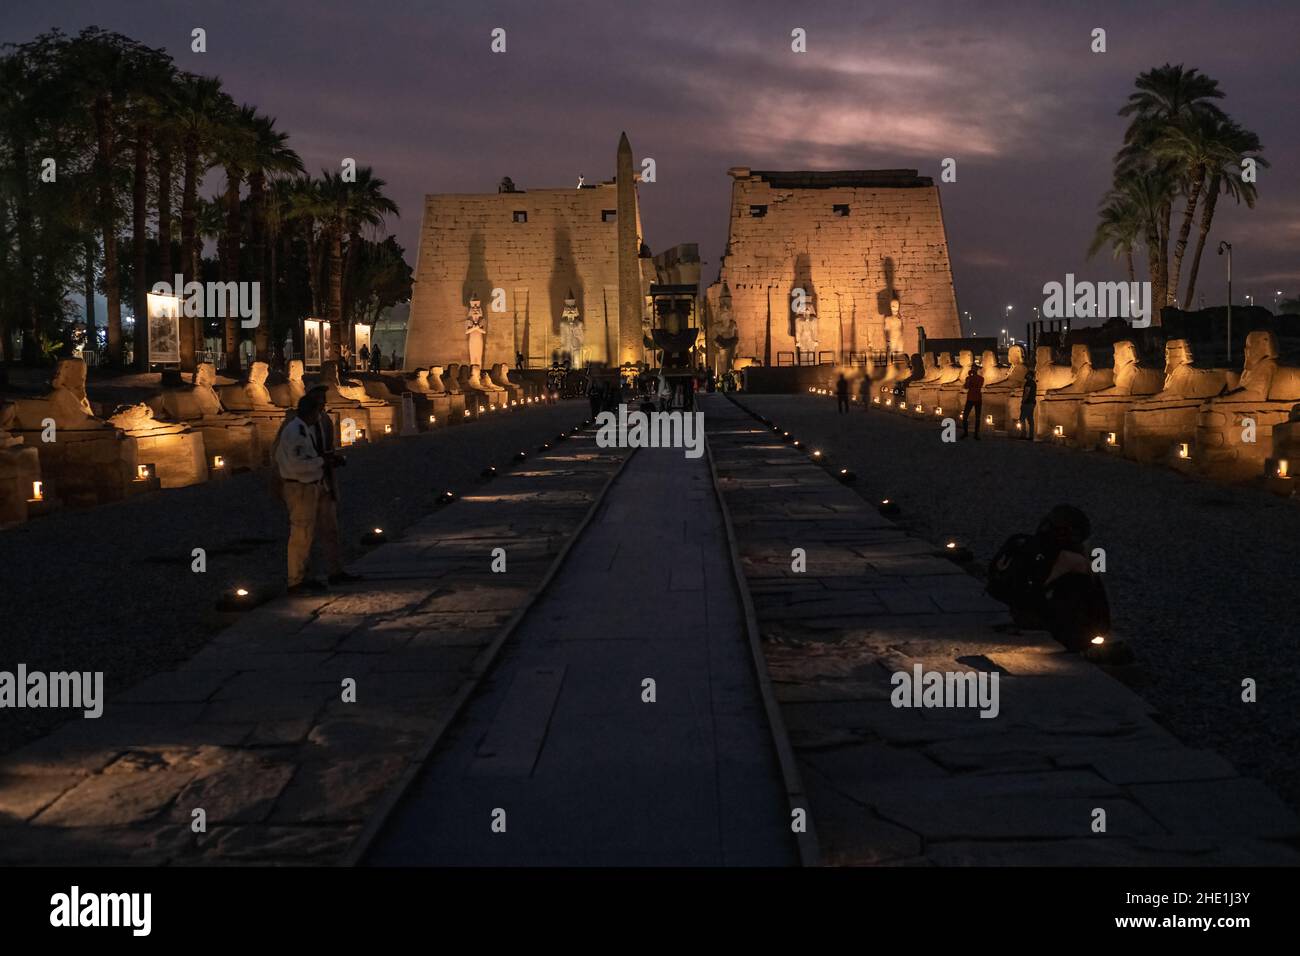 The avenue of the sphinxes road at Luxor temple, Egypt dramatically illuminated at night. The rams road has just been restored and reopened recently. Stock Photo